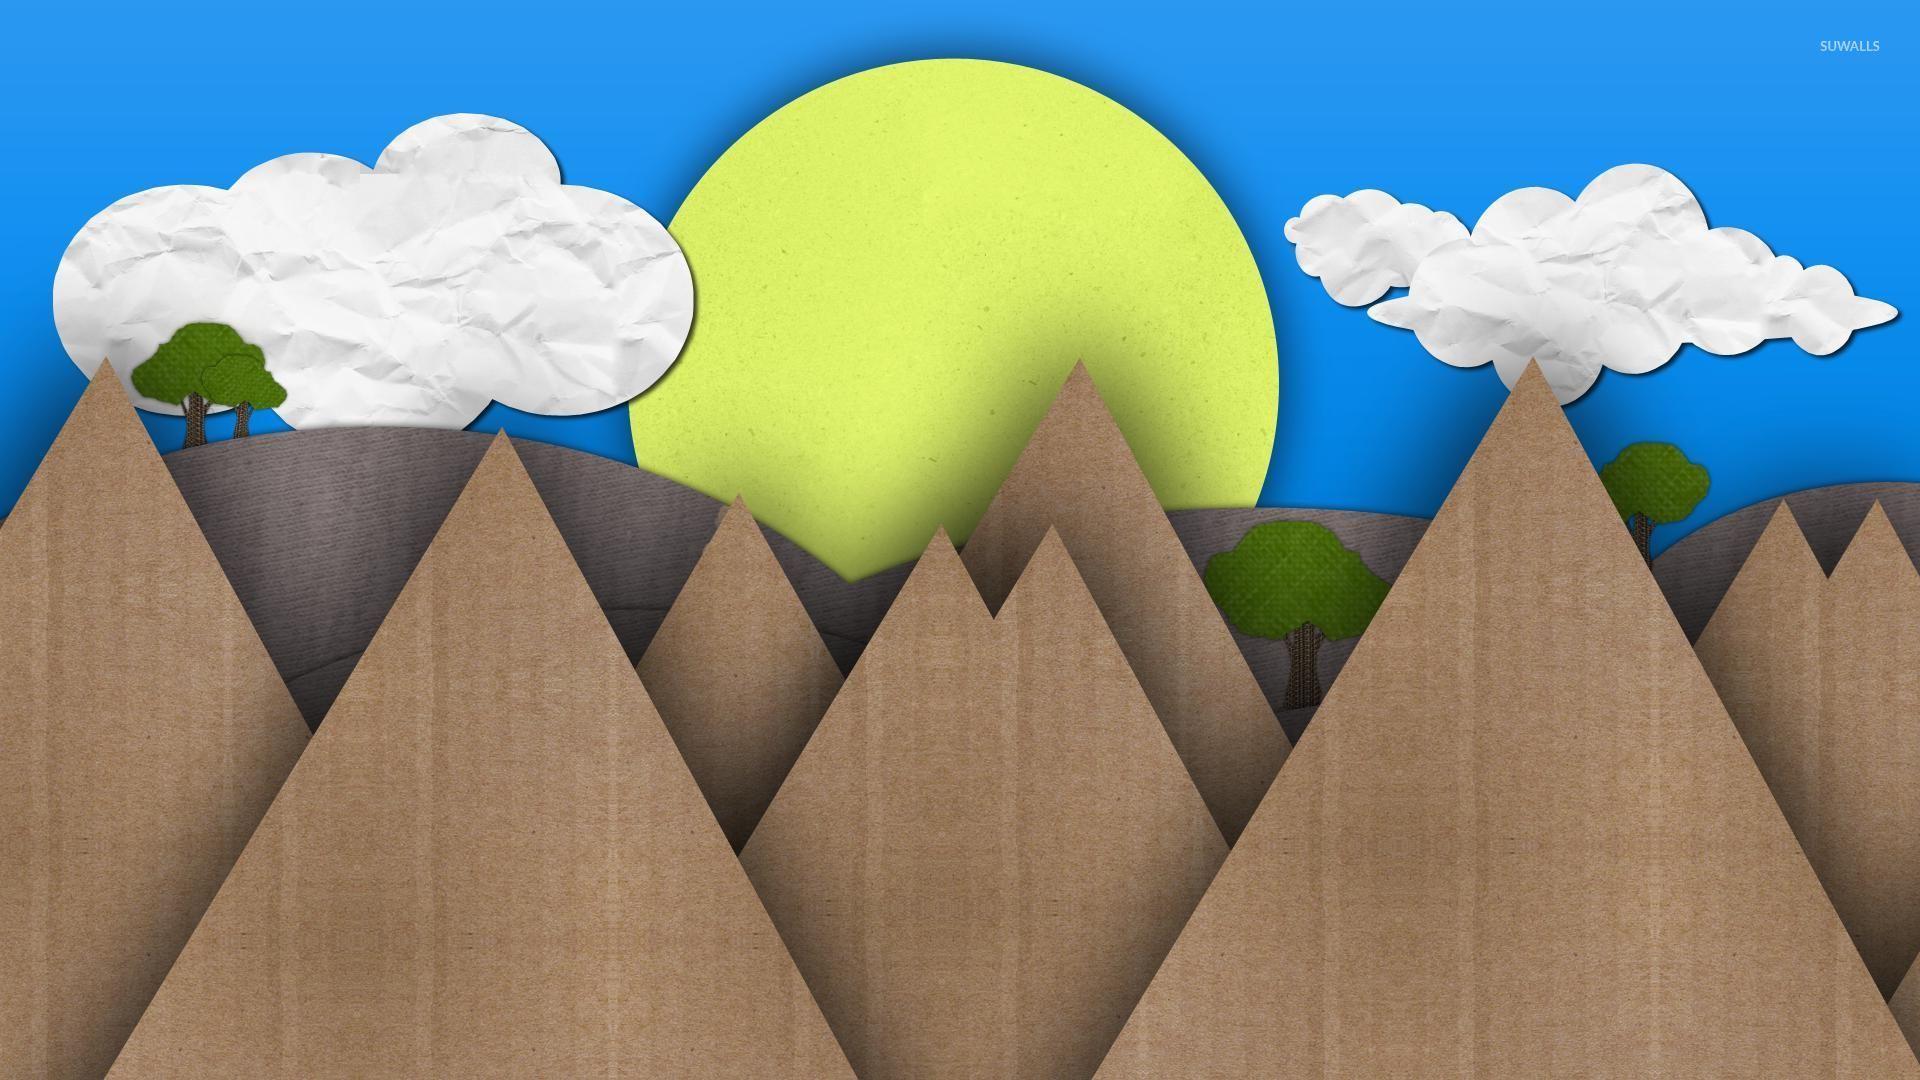 Sun and mountains made from cardboard wallpaper wallpaper